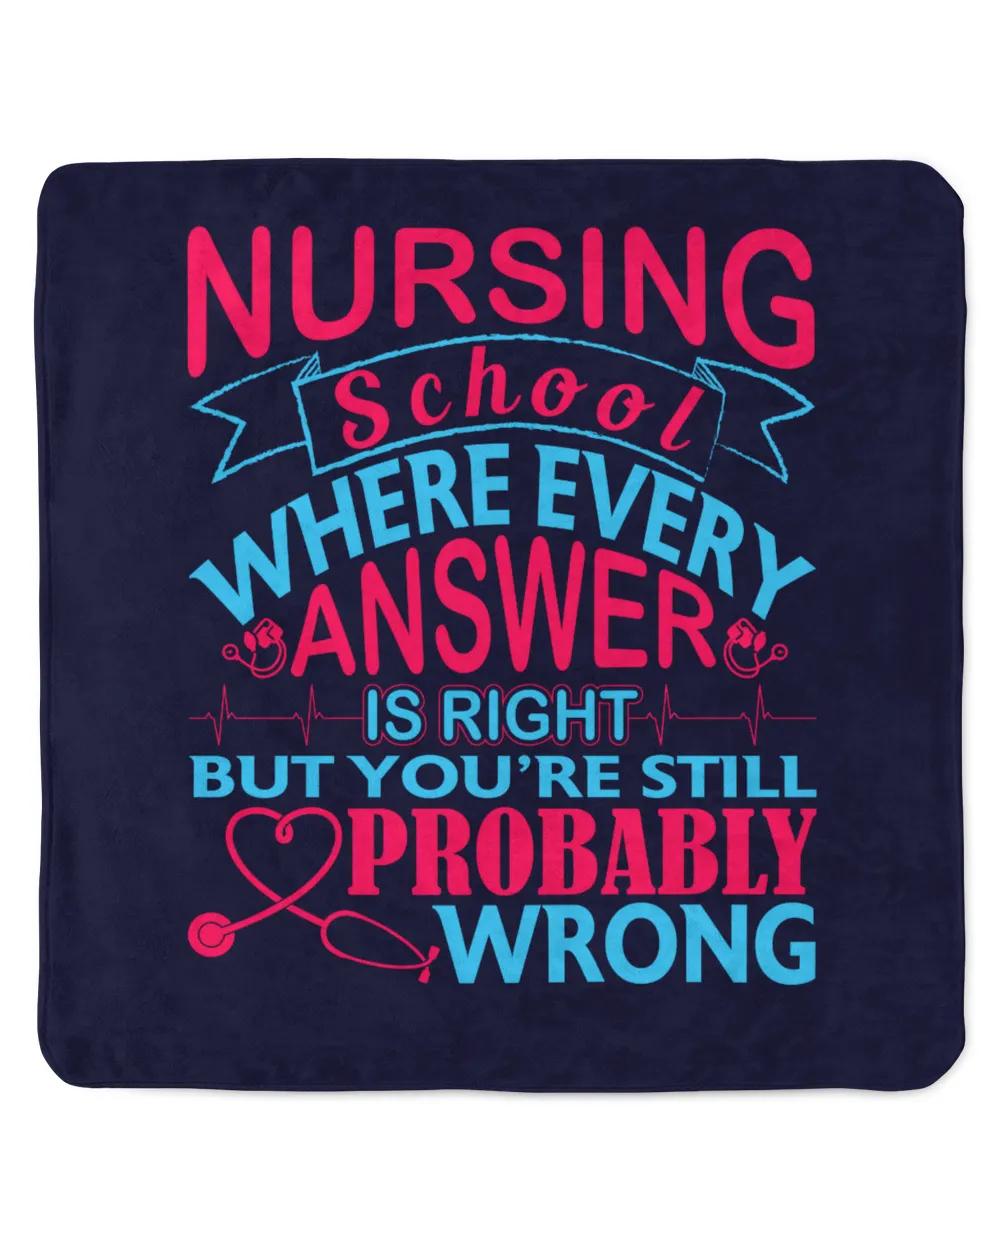 Nursing School Where Every Answer Is Right But You're Still Probably Wrong